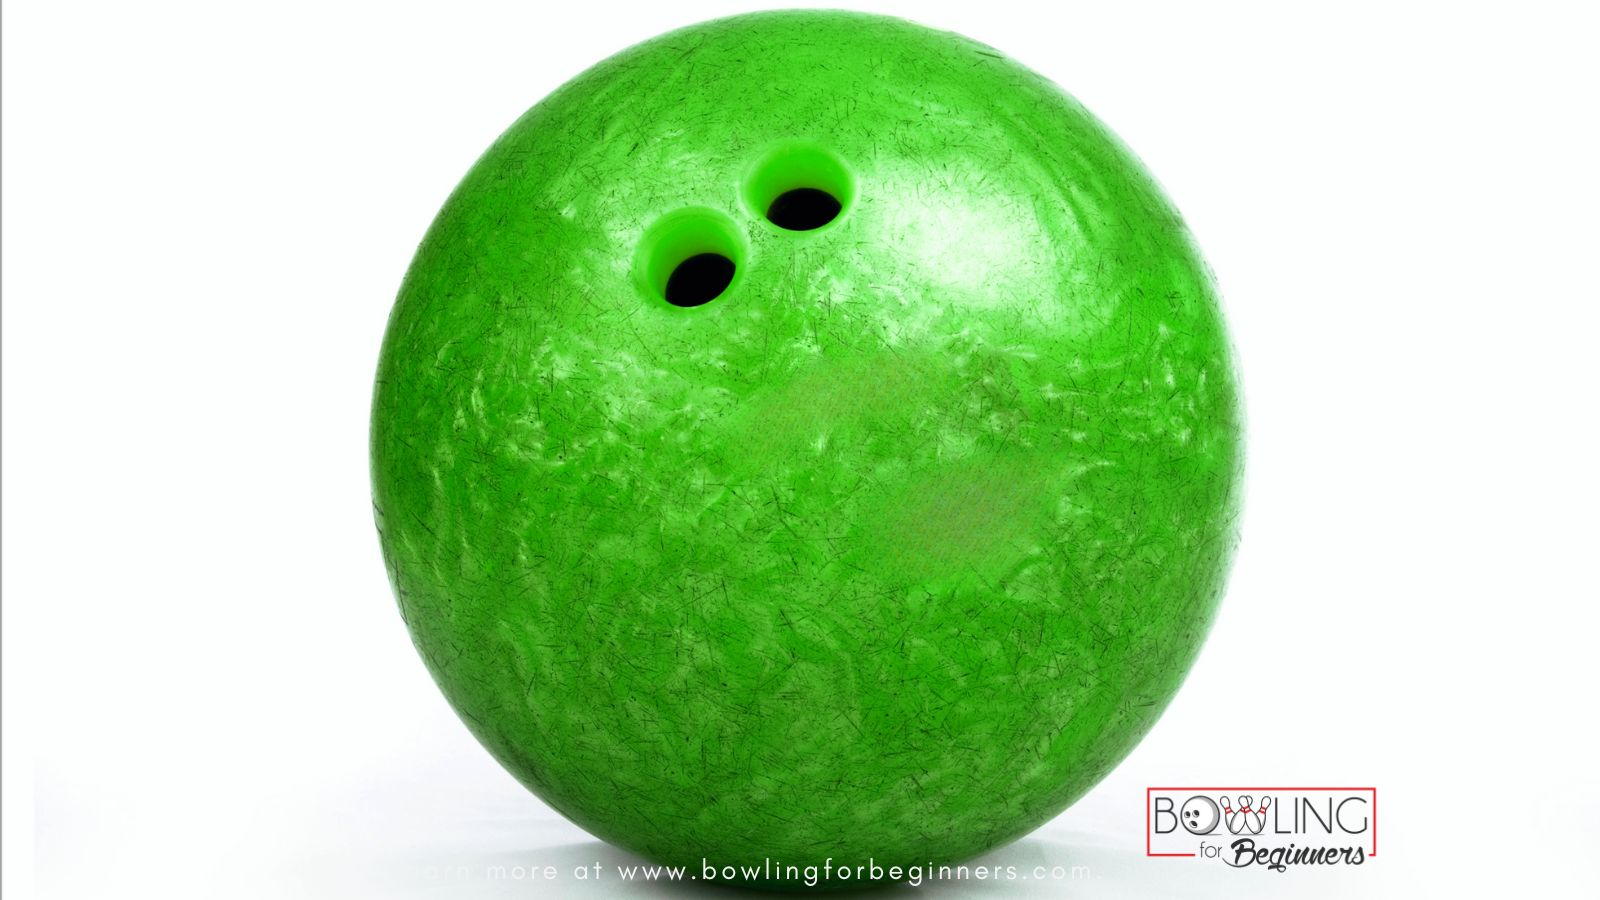 The size holes varies in the green bowling ball.